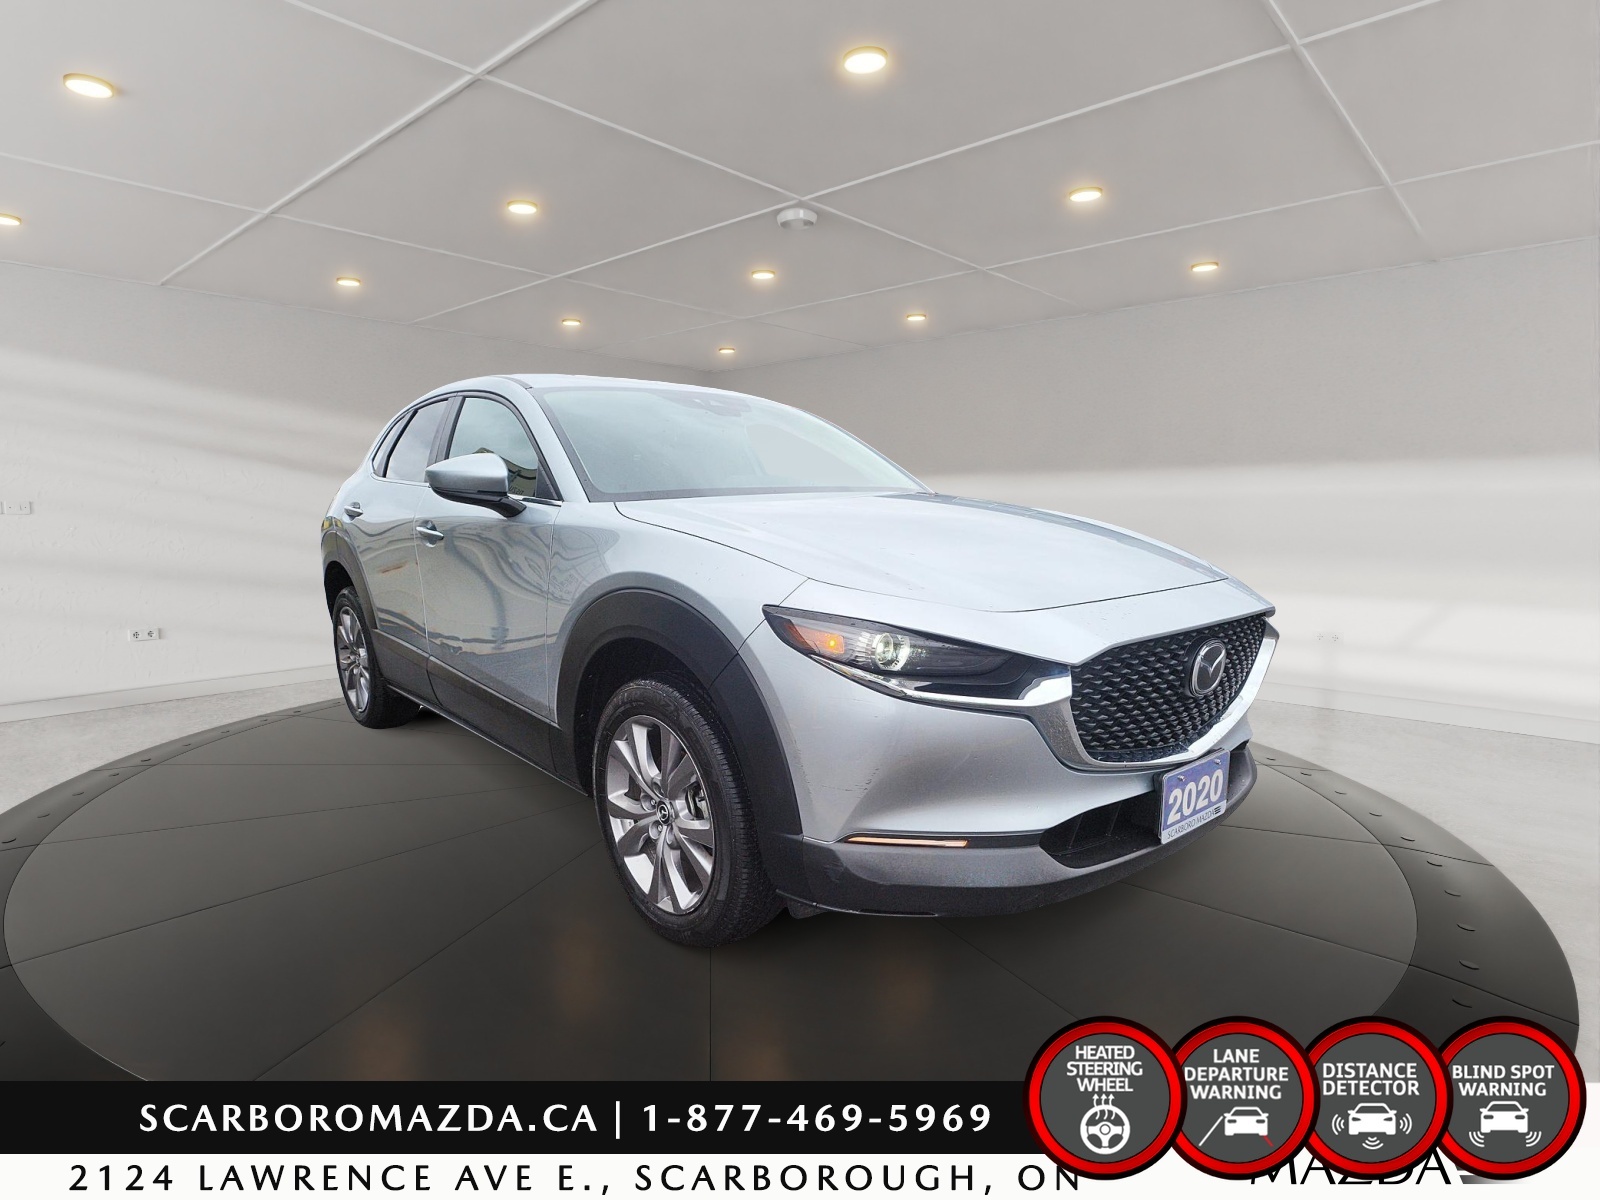 2020 Mazda CX-30 GS|LOW KM|1 OWNER CLEAN CARFAX 